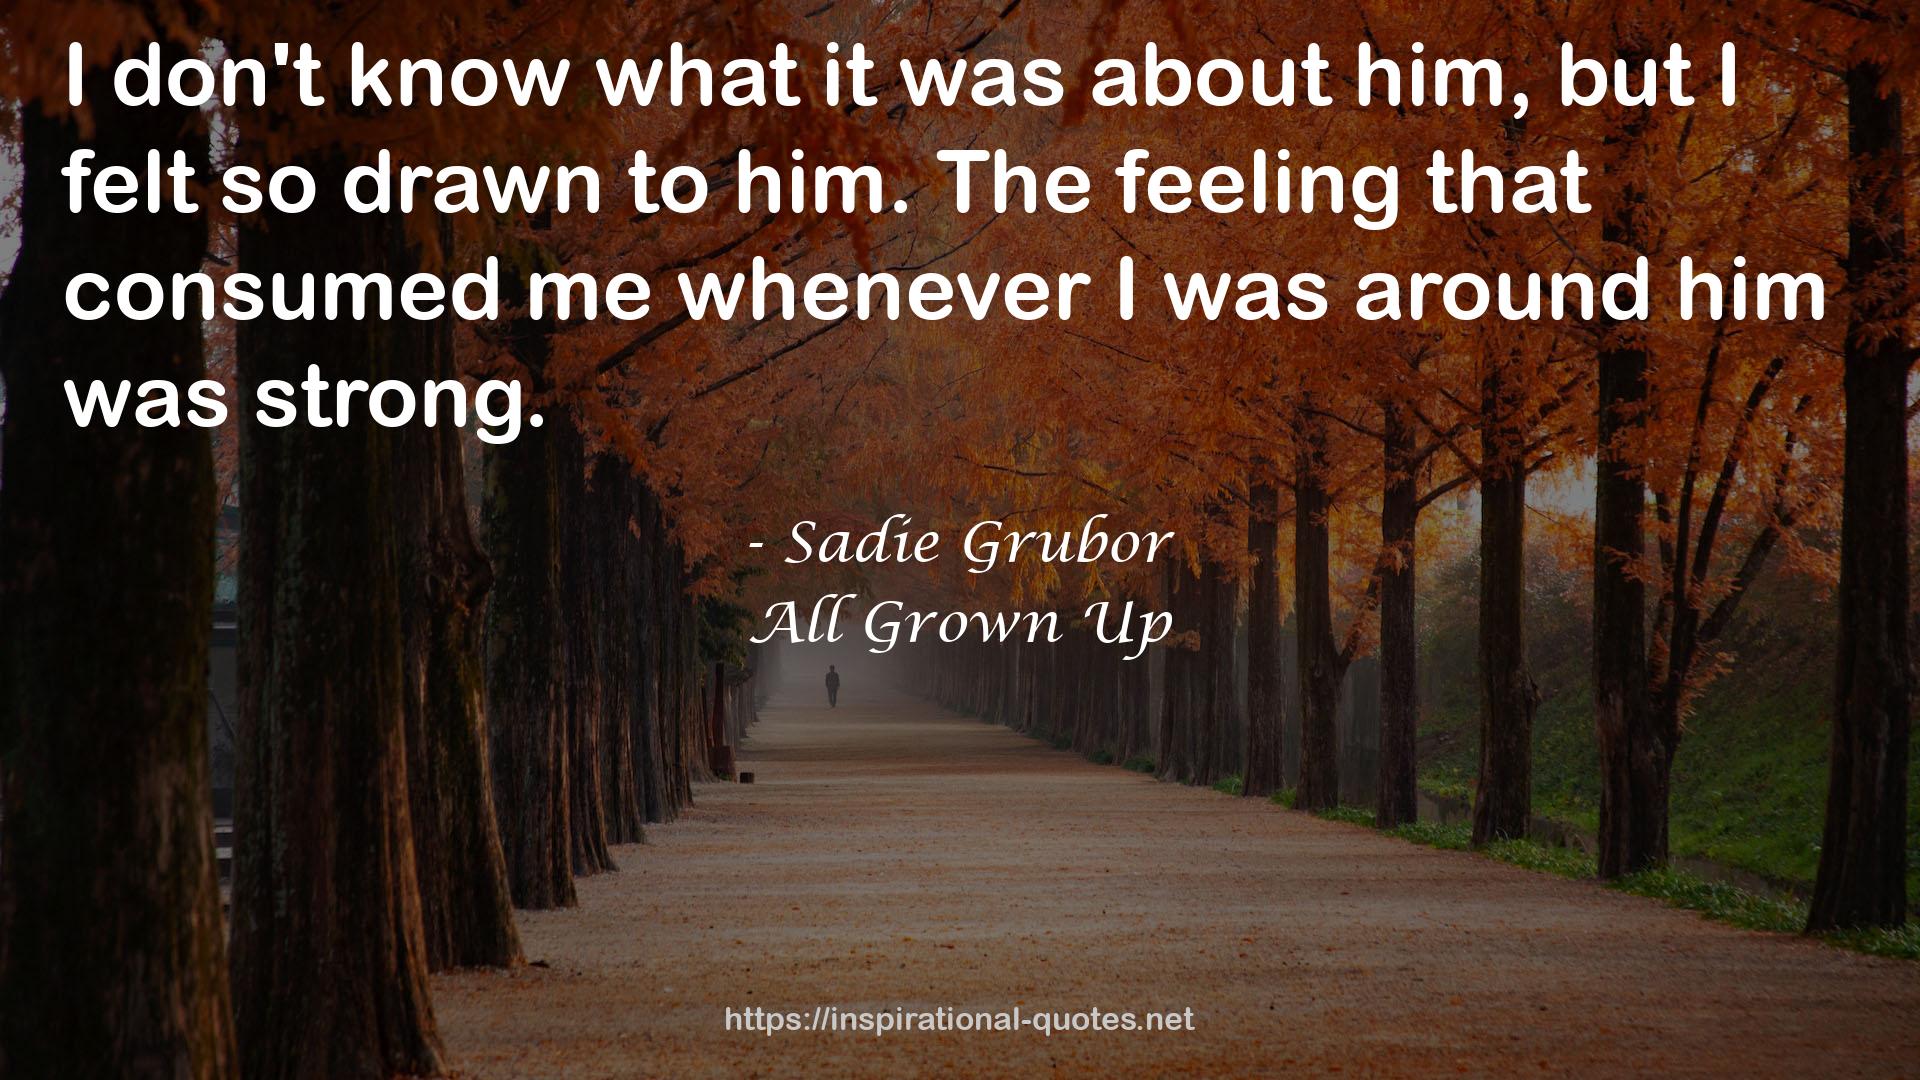 All Grown Up QUOTES